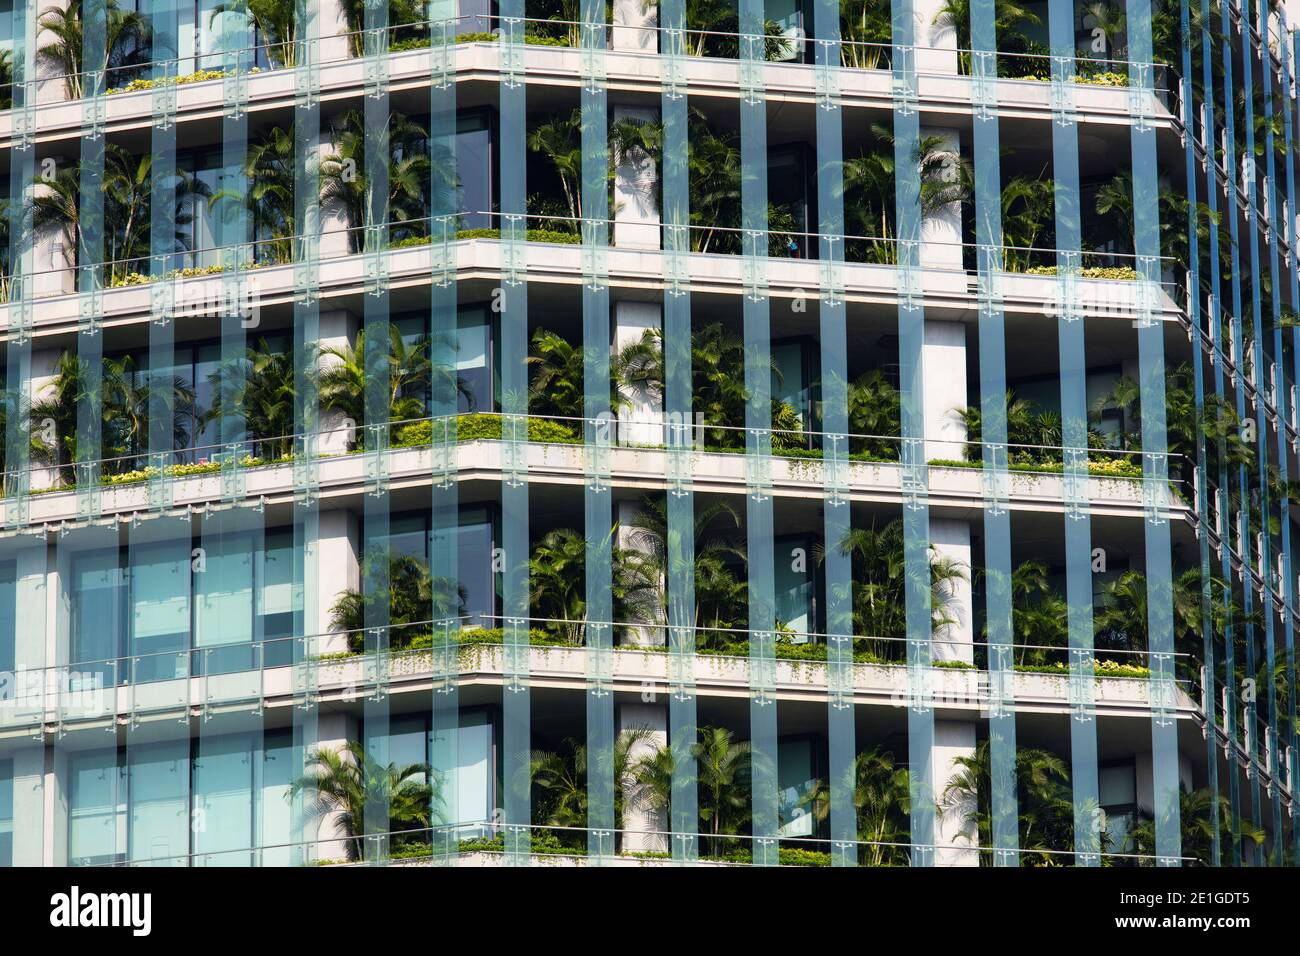 CapitaGreen is a 40-story tower located in Singapore's central business district. Stock Photo